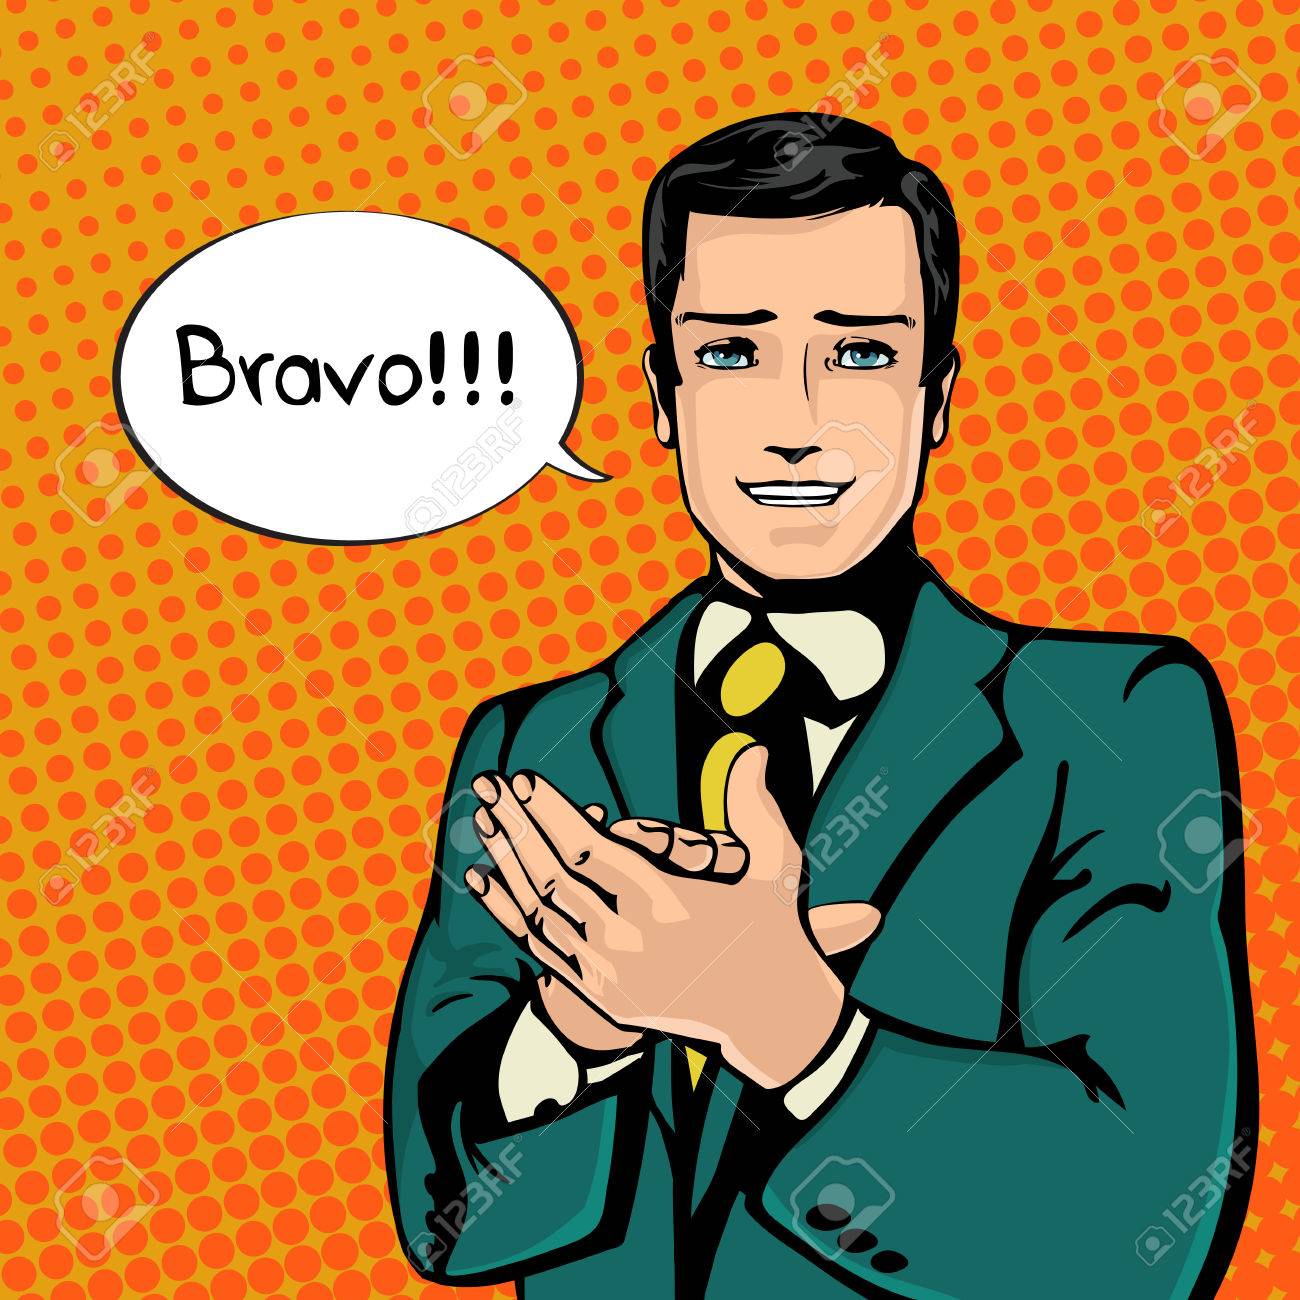 57470917-vector-illustration-of-successful-businessman-applause-in-vintage-pop-art-comics-style-likes-and-pos.jpg